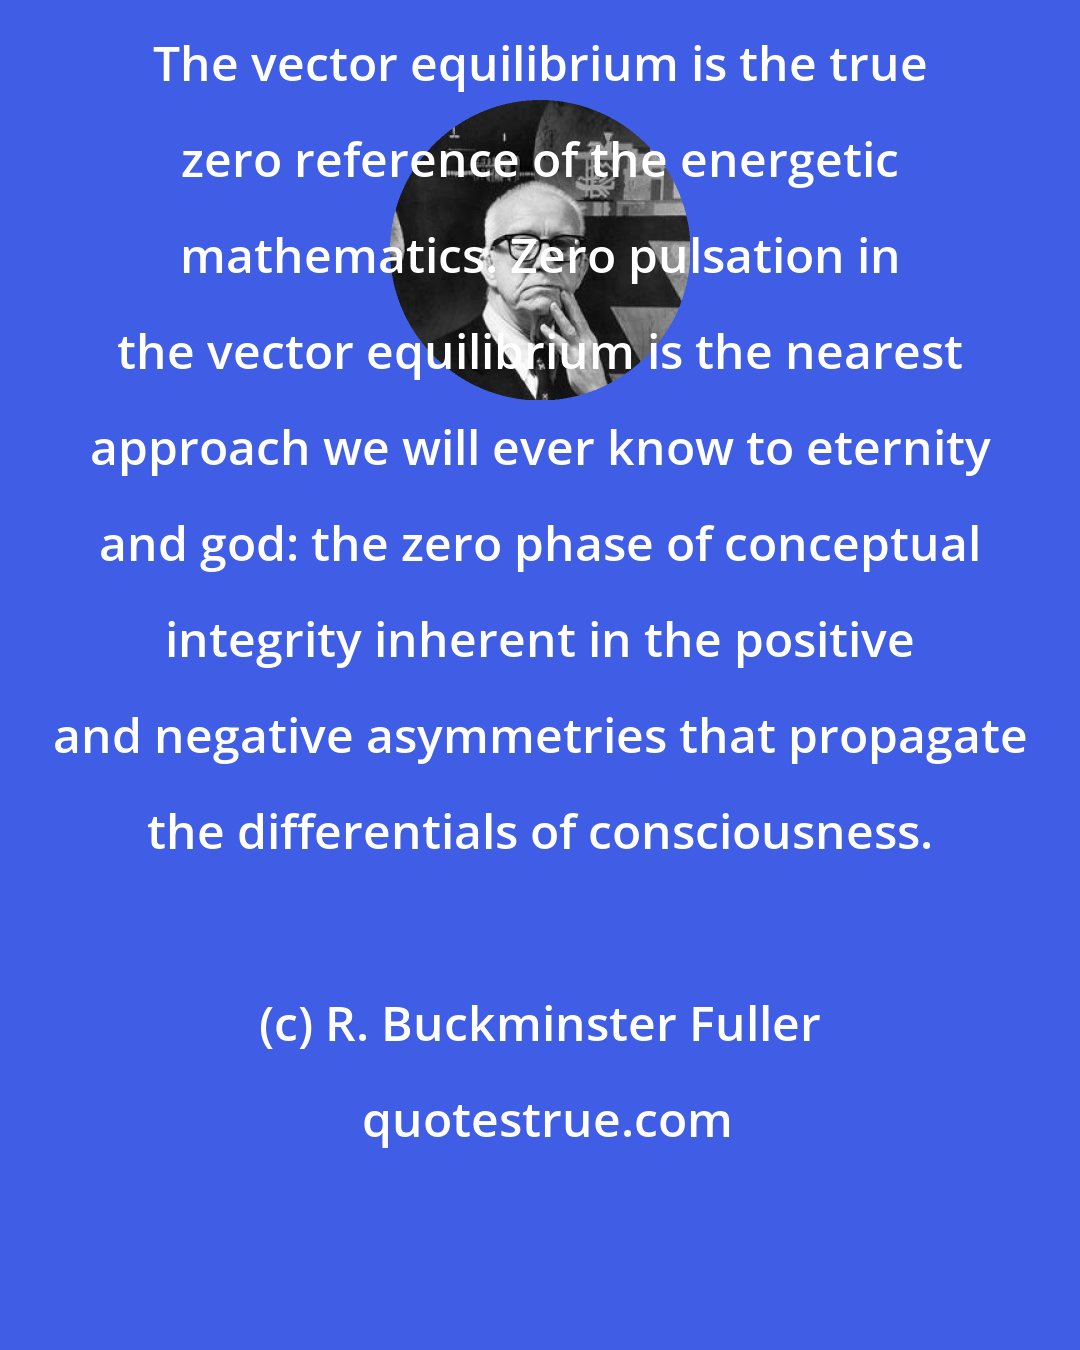 R. Buckminster Fuller: The vector equilibrium is the true zero reference of the energetic mathematics. Zero pulsation in the vector equilibrium is the nearest approach we will ever know to eternity and god: the zero phase of conceptual integrity inherent in the positive and negative asymmetries that propagate the differentials of consciousness.